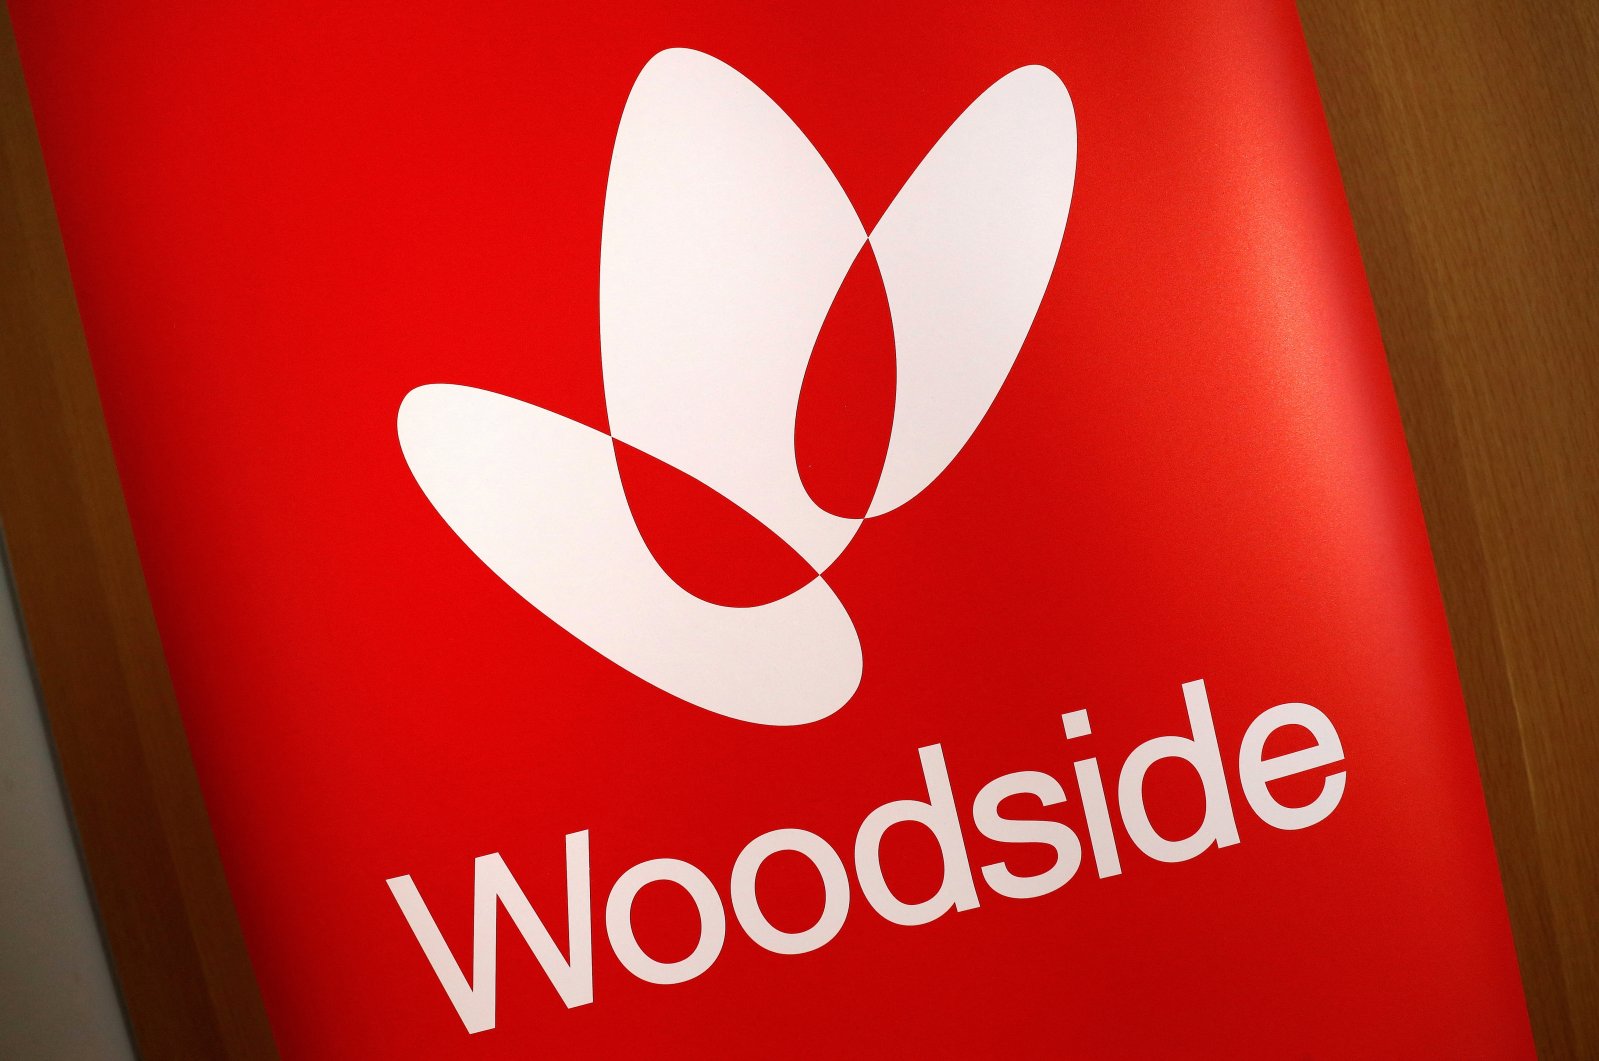 The logo for Woodside Petroleum adorns a promotional poster on display at a briefing for investors in Sydney, Australia, May 23, 2018. (Reuters Photo)